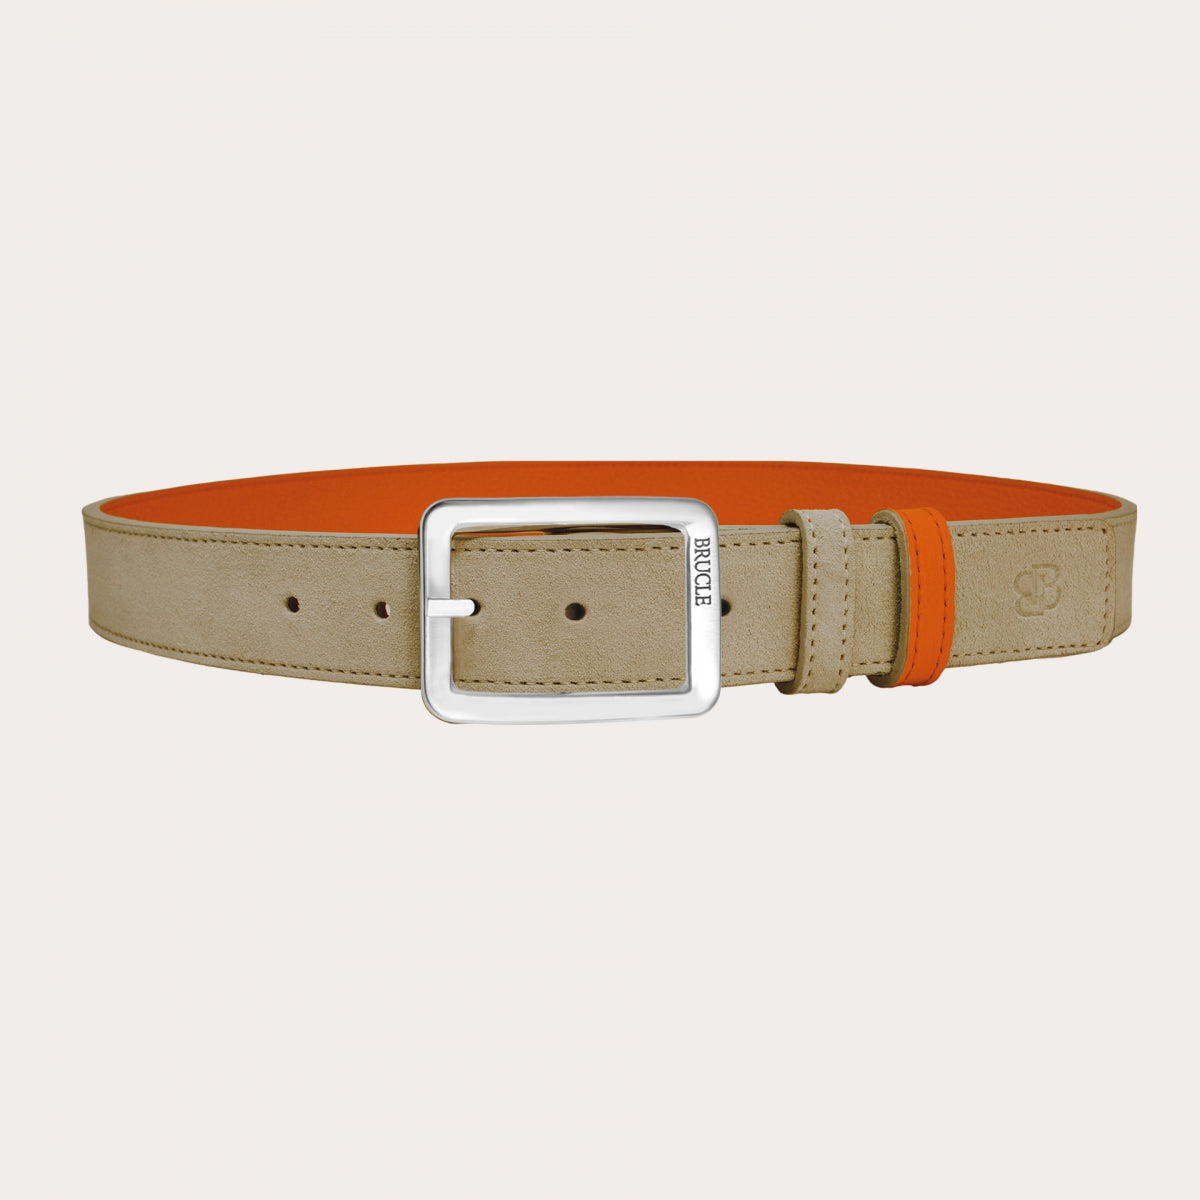 Reversible belt in beige suede and orange tumbled leather